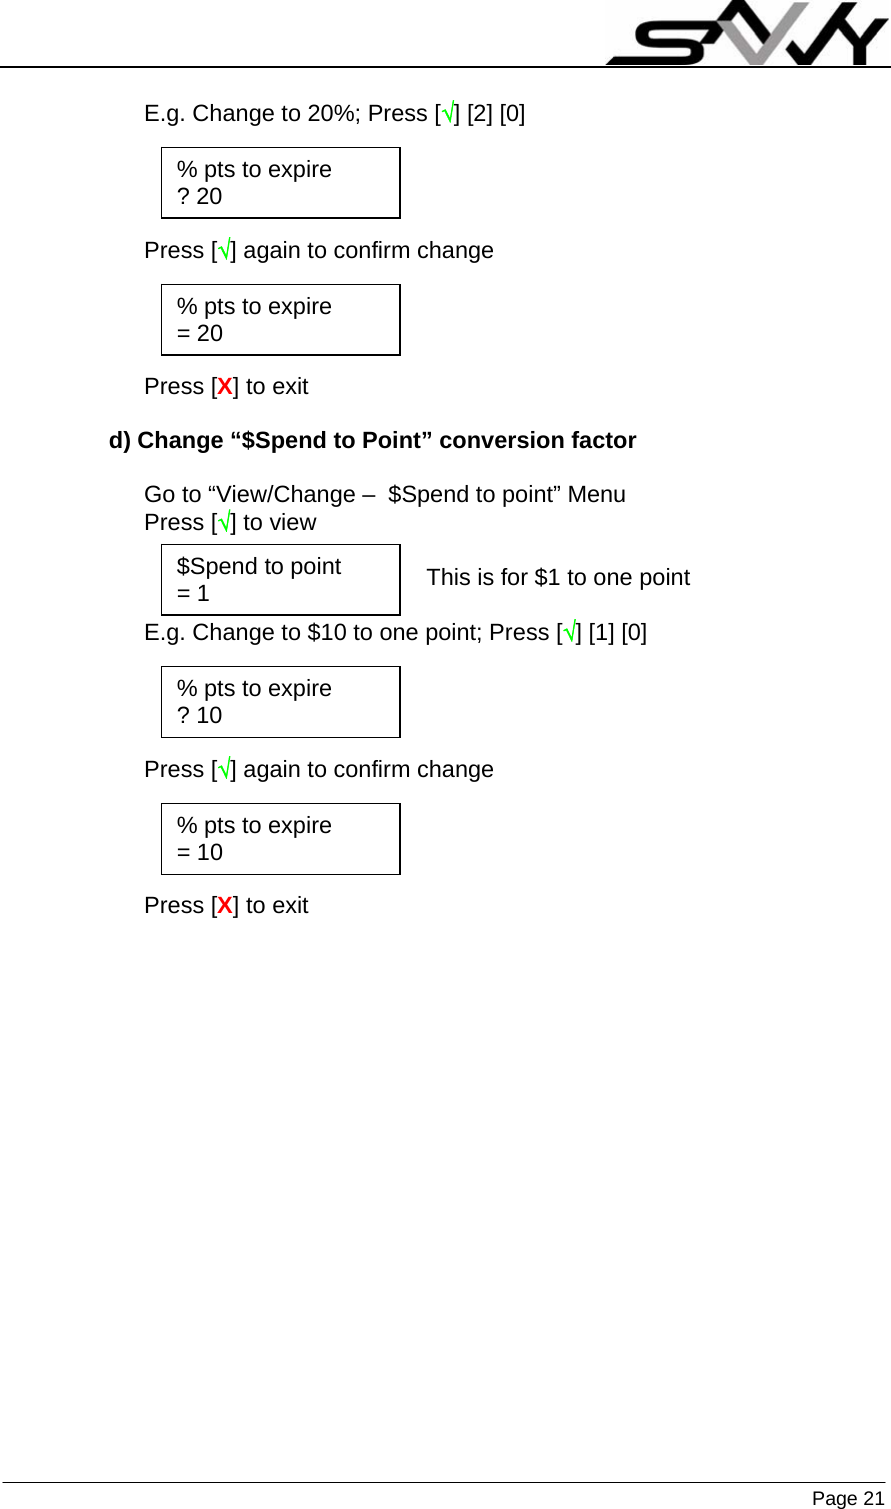                    Page 21   E.g. Change to 20%; Press [√] [2] [0]     Press [√] again to confirm change     Press [X] to exit  d) Change “$Spend to Point” conversion factor  Go to “View/Change –  $Spend to point” Menu Press [√] to view  This is for $1 to one point  E.g. Change to $10 to one point; Press [√] [1] [0]     Press [√] again to confirm change     Press [X] to exit $Spend to point = 1 % pts to expire ? 20 % pts to expire = 20 % pts to expire ? 10 % pts to expire = 10 